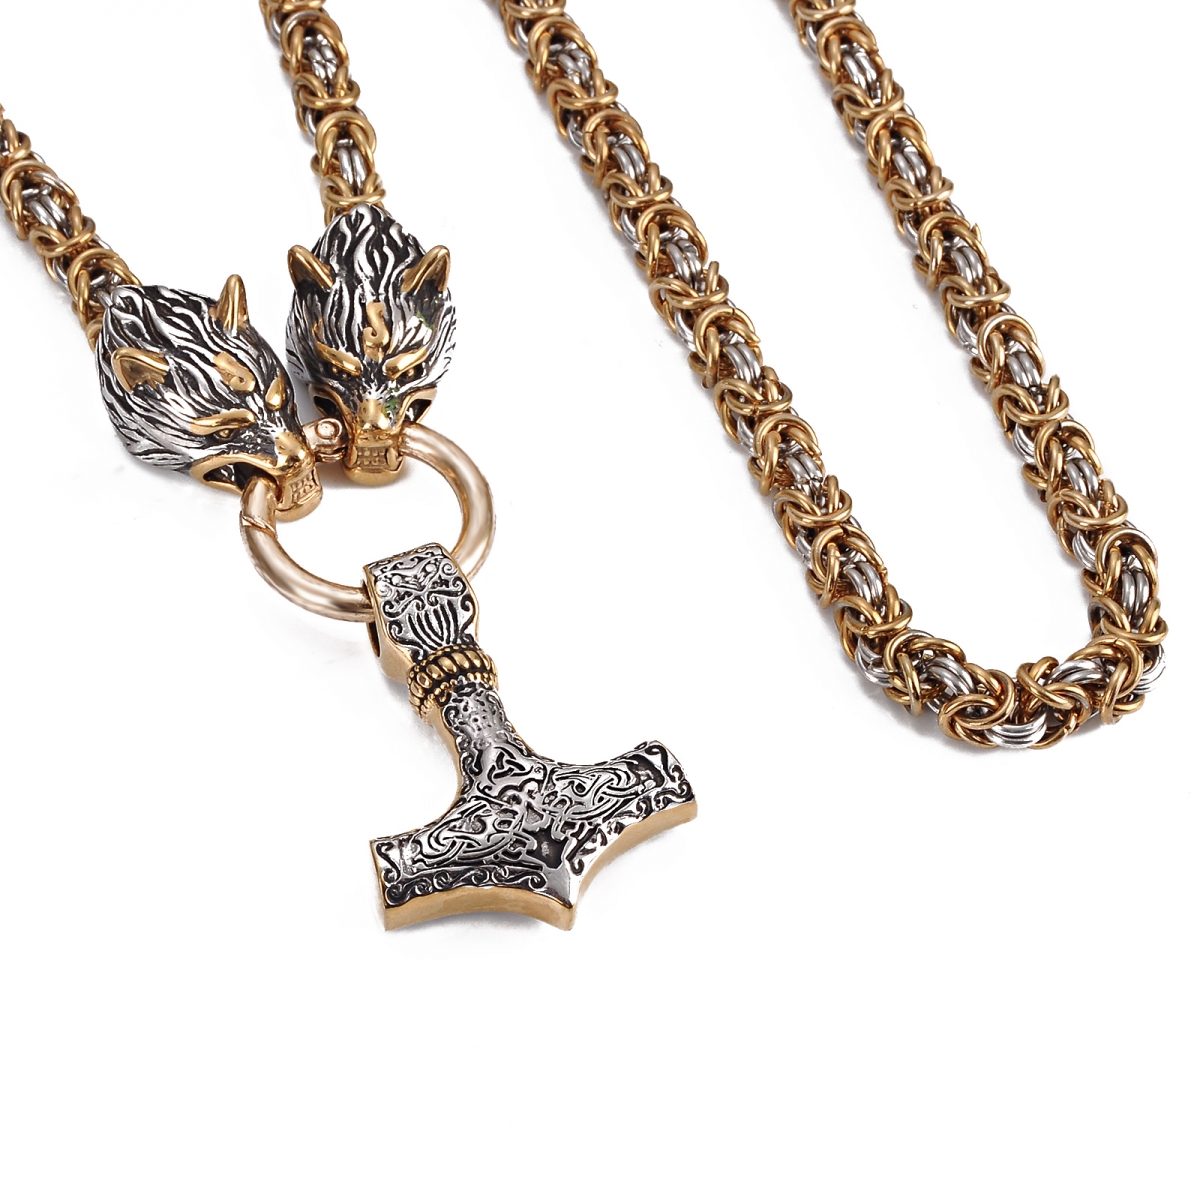 King Chain Wolves Holding Mjolnir Pendant US$14/PC-NORSECOLLECTION- Viking Jewelry,Viking Necklace,Viking Bracelet,Viking Rings,Viking Mugs,Viking Accessories,Viking Crafts